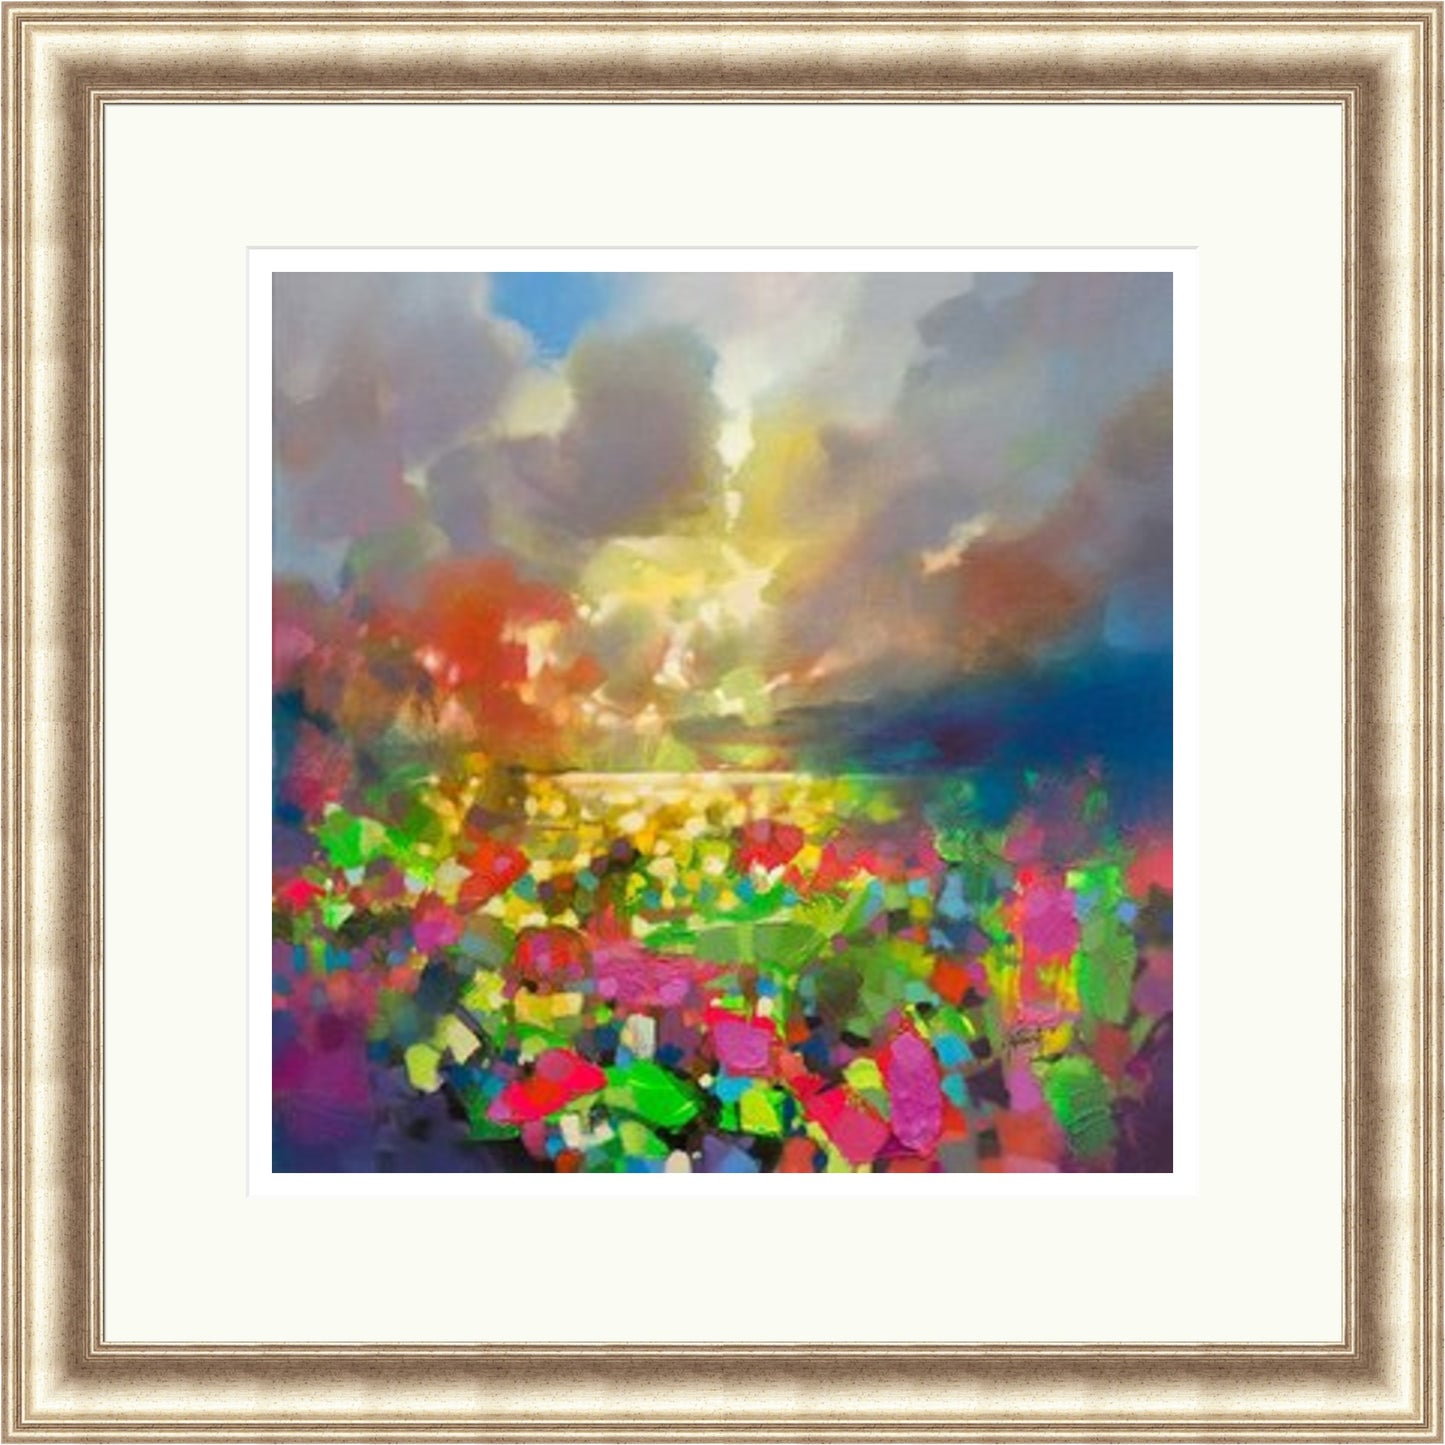 Convection (Limited Edition) by Scott Naismith